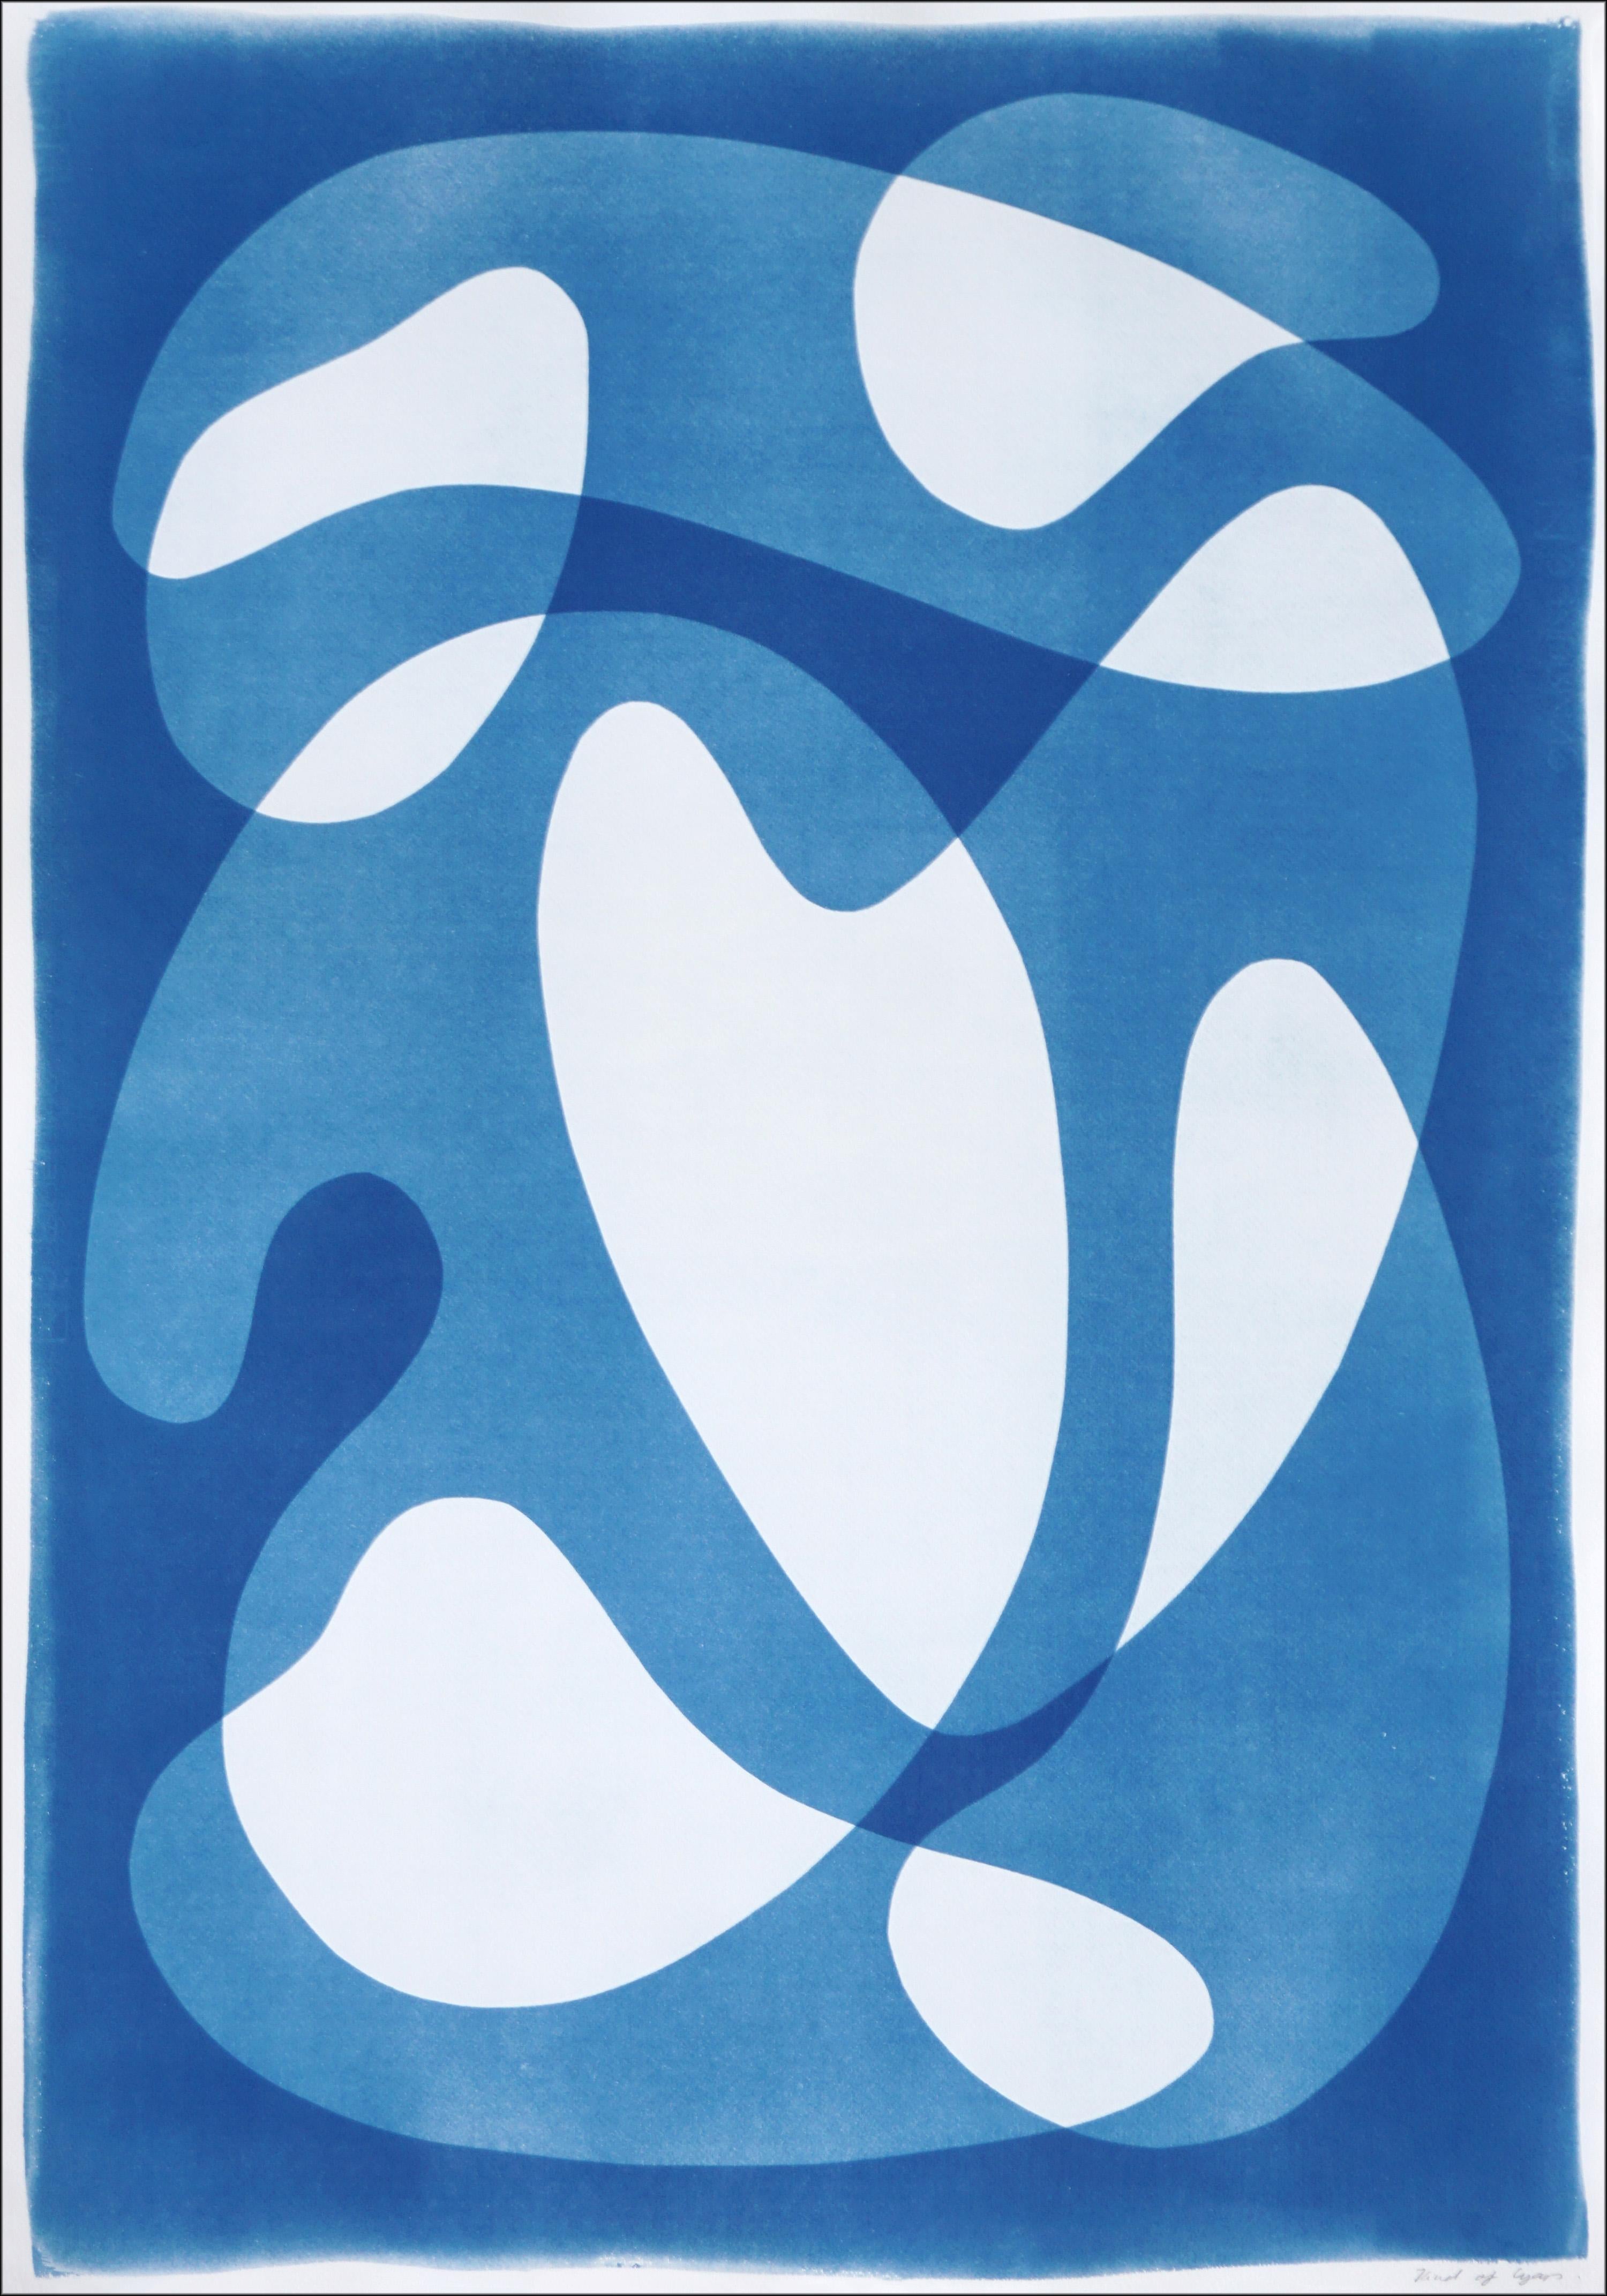 Kind of Cyan Abstract Print - Mid-Century Shapes IV, White and Blue Abstract Floating Shapes, Unique Cyanotype